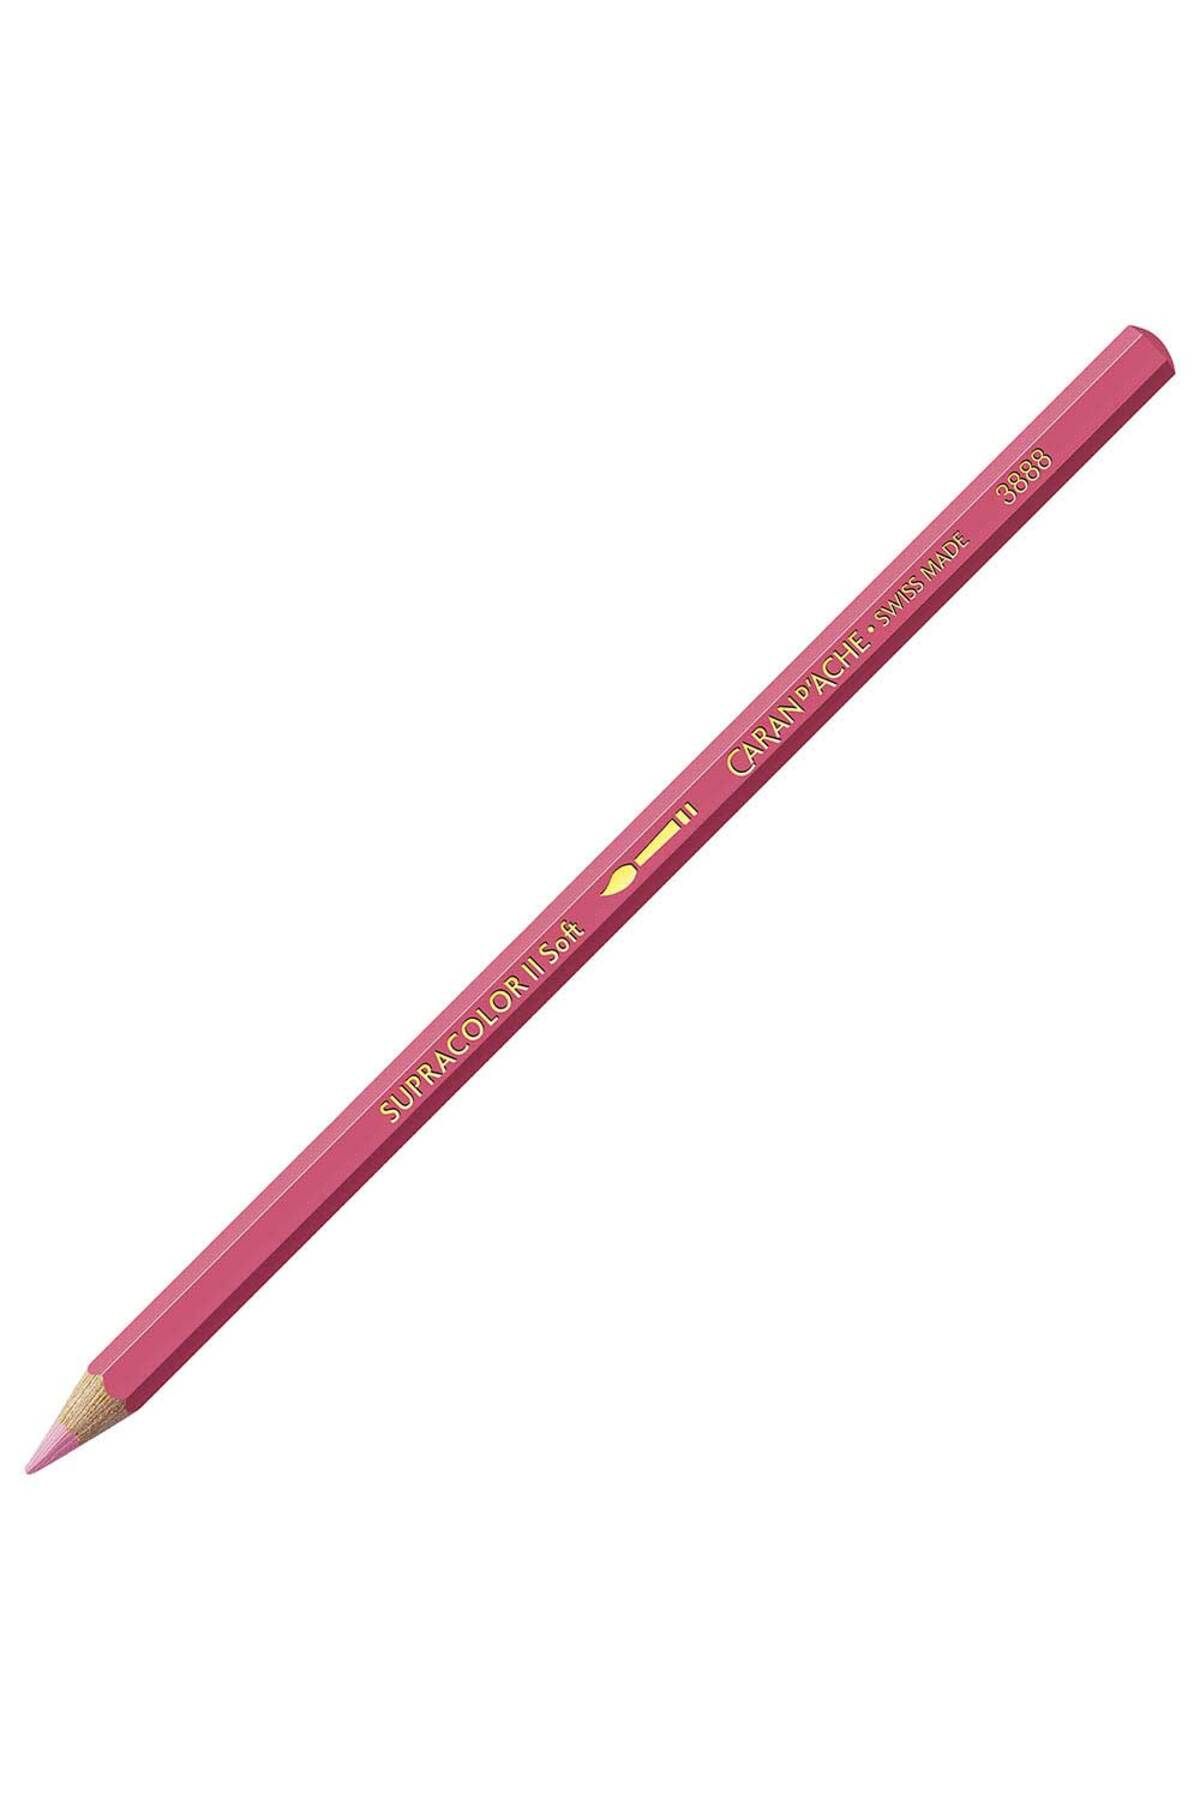 Caran d'Ache Supracolor Soft Raspberry Red 270